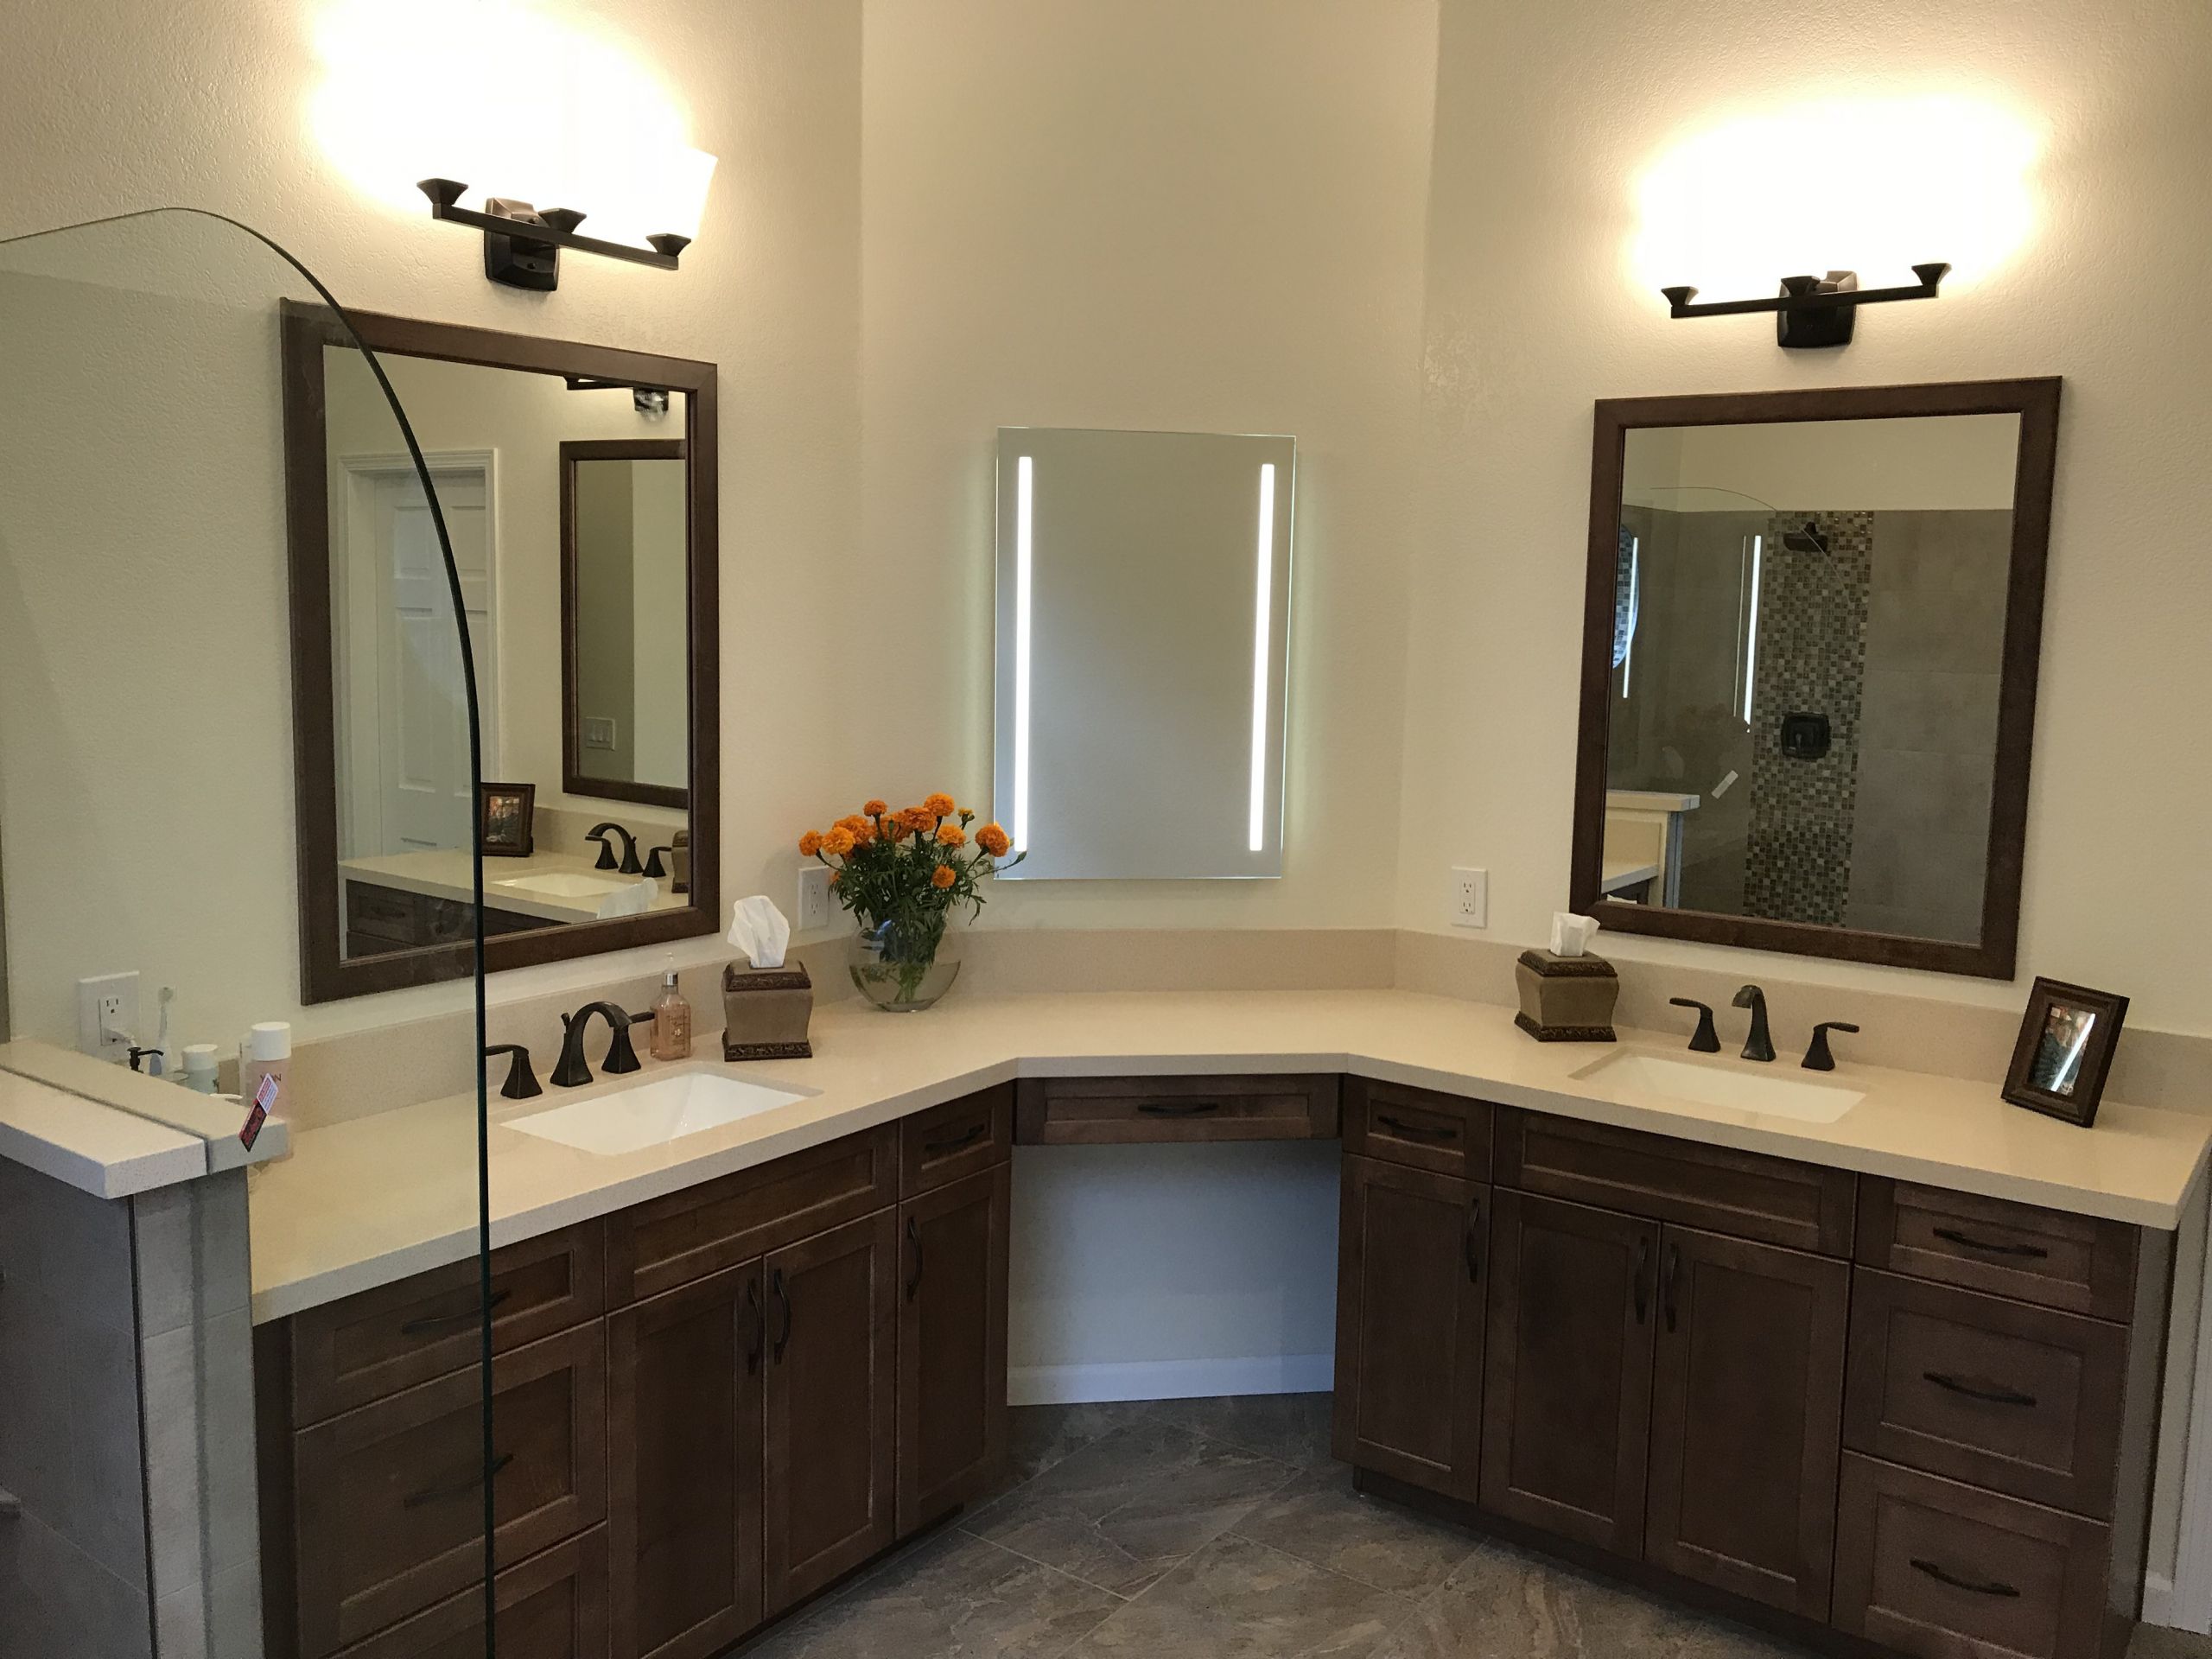 Kitchen And Bath Cabinetry
 CABINETS & VANITIES